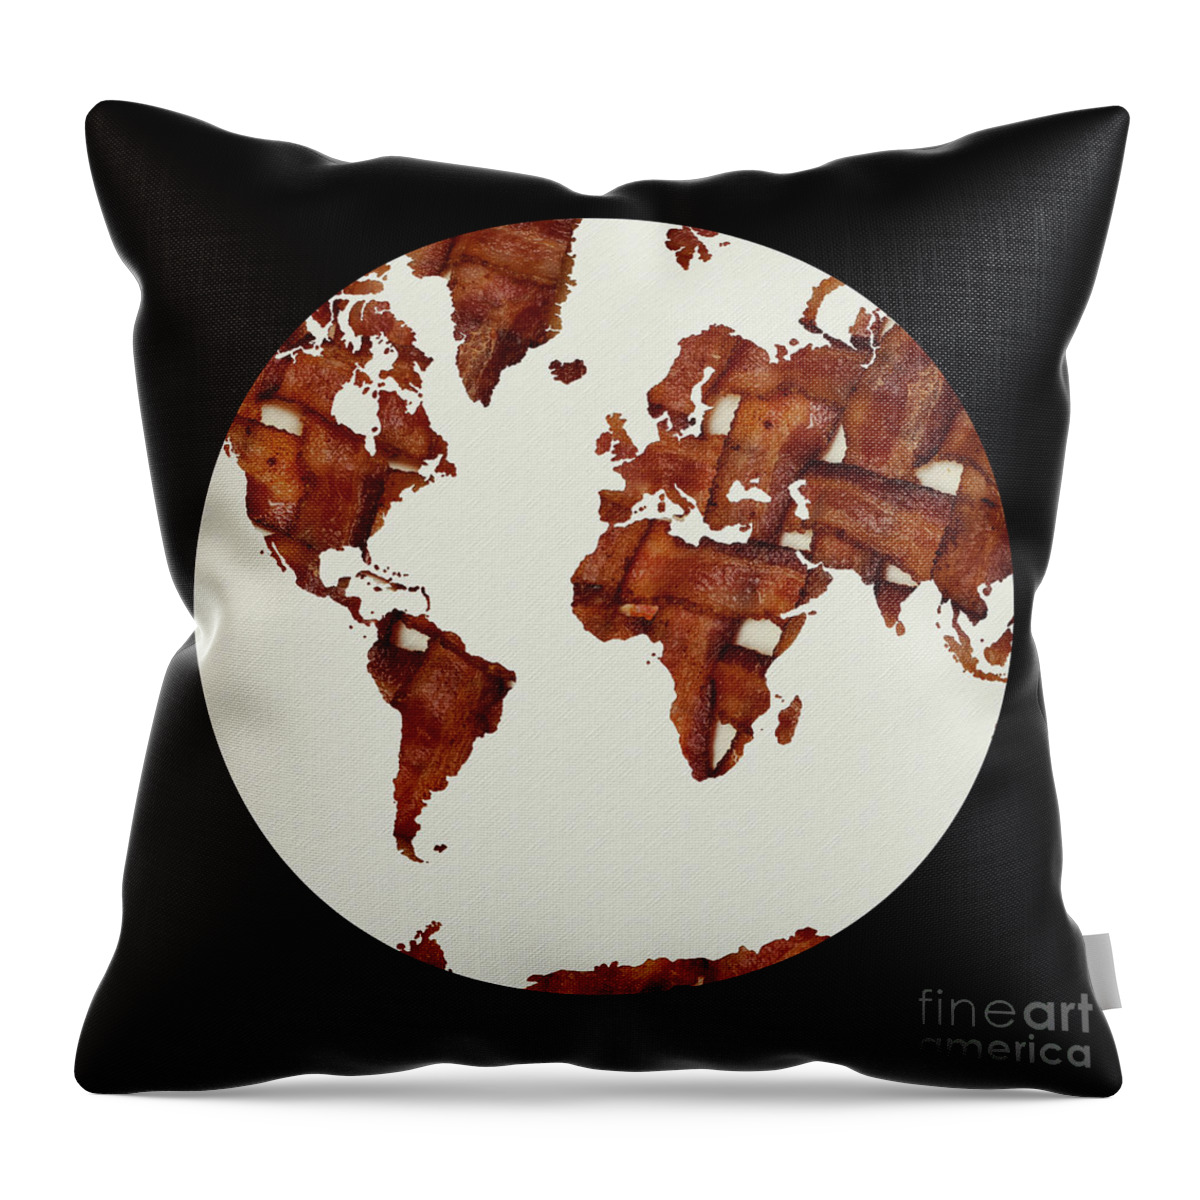 Bacon Throw Pillow featuring the mixed media Bacon World 1 by Andee Design